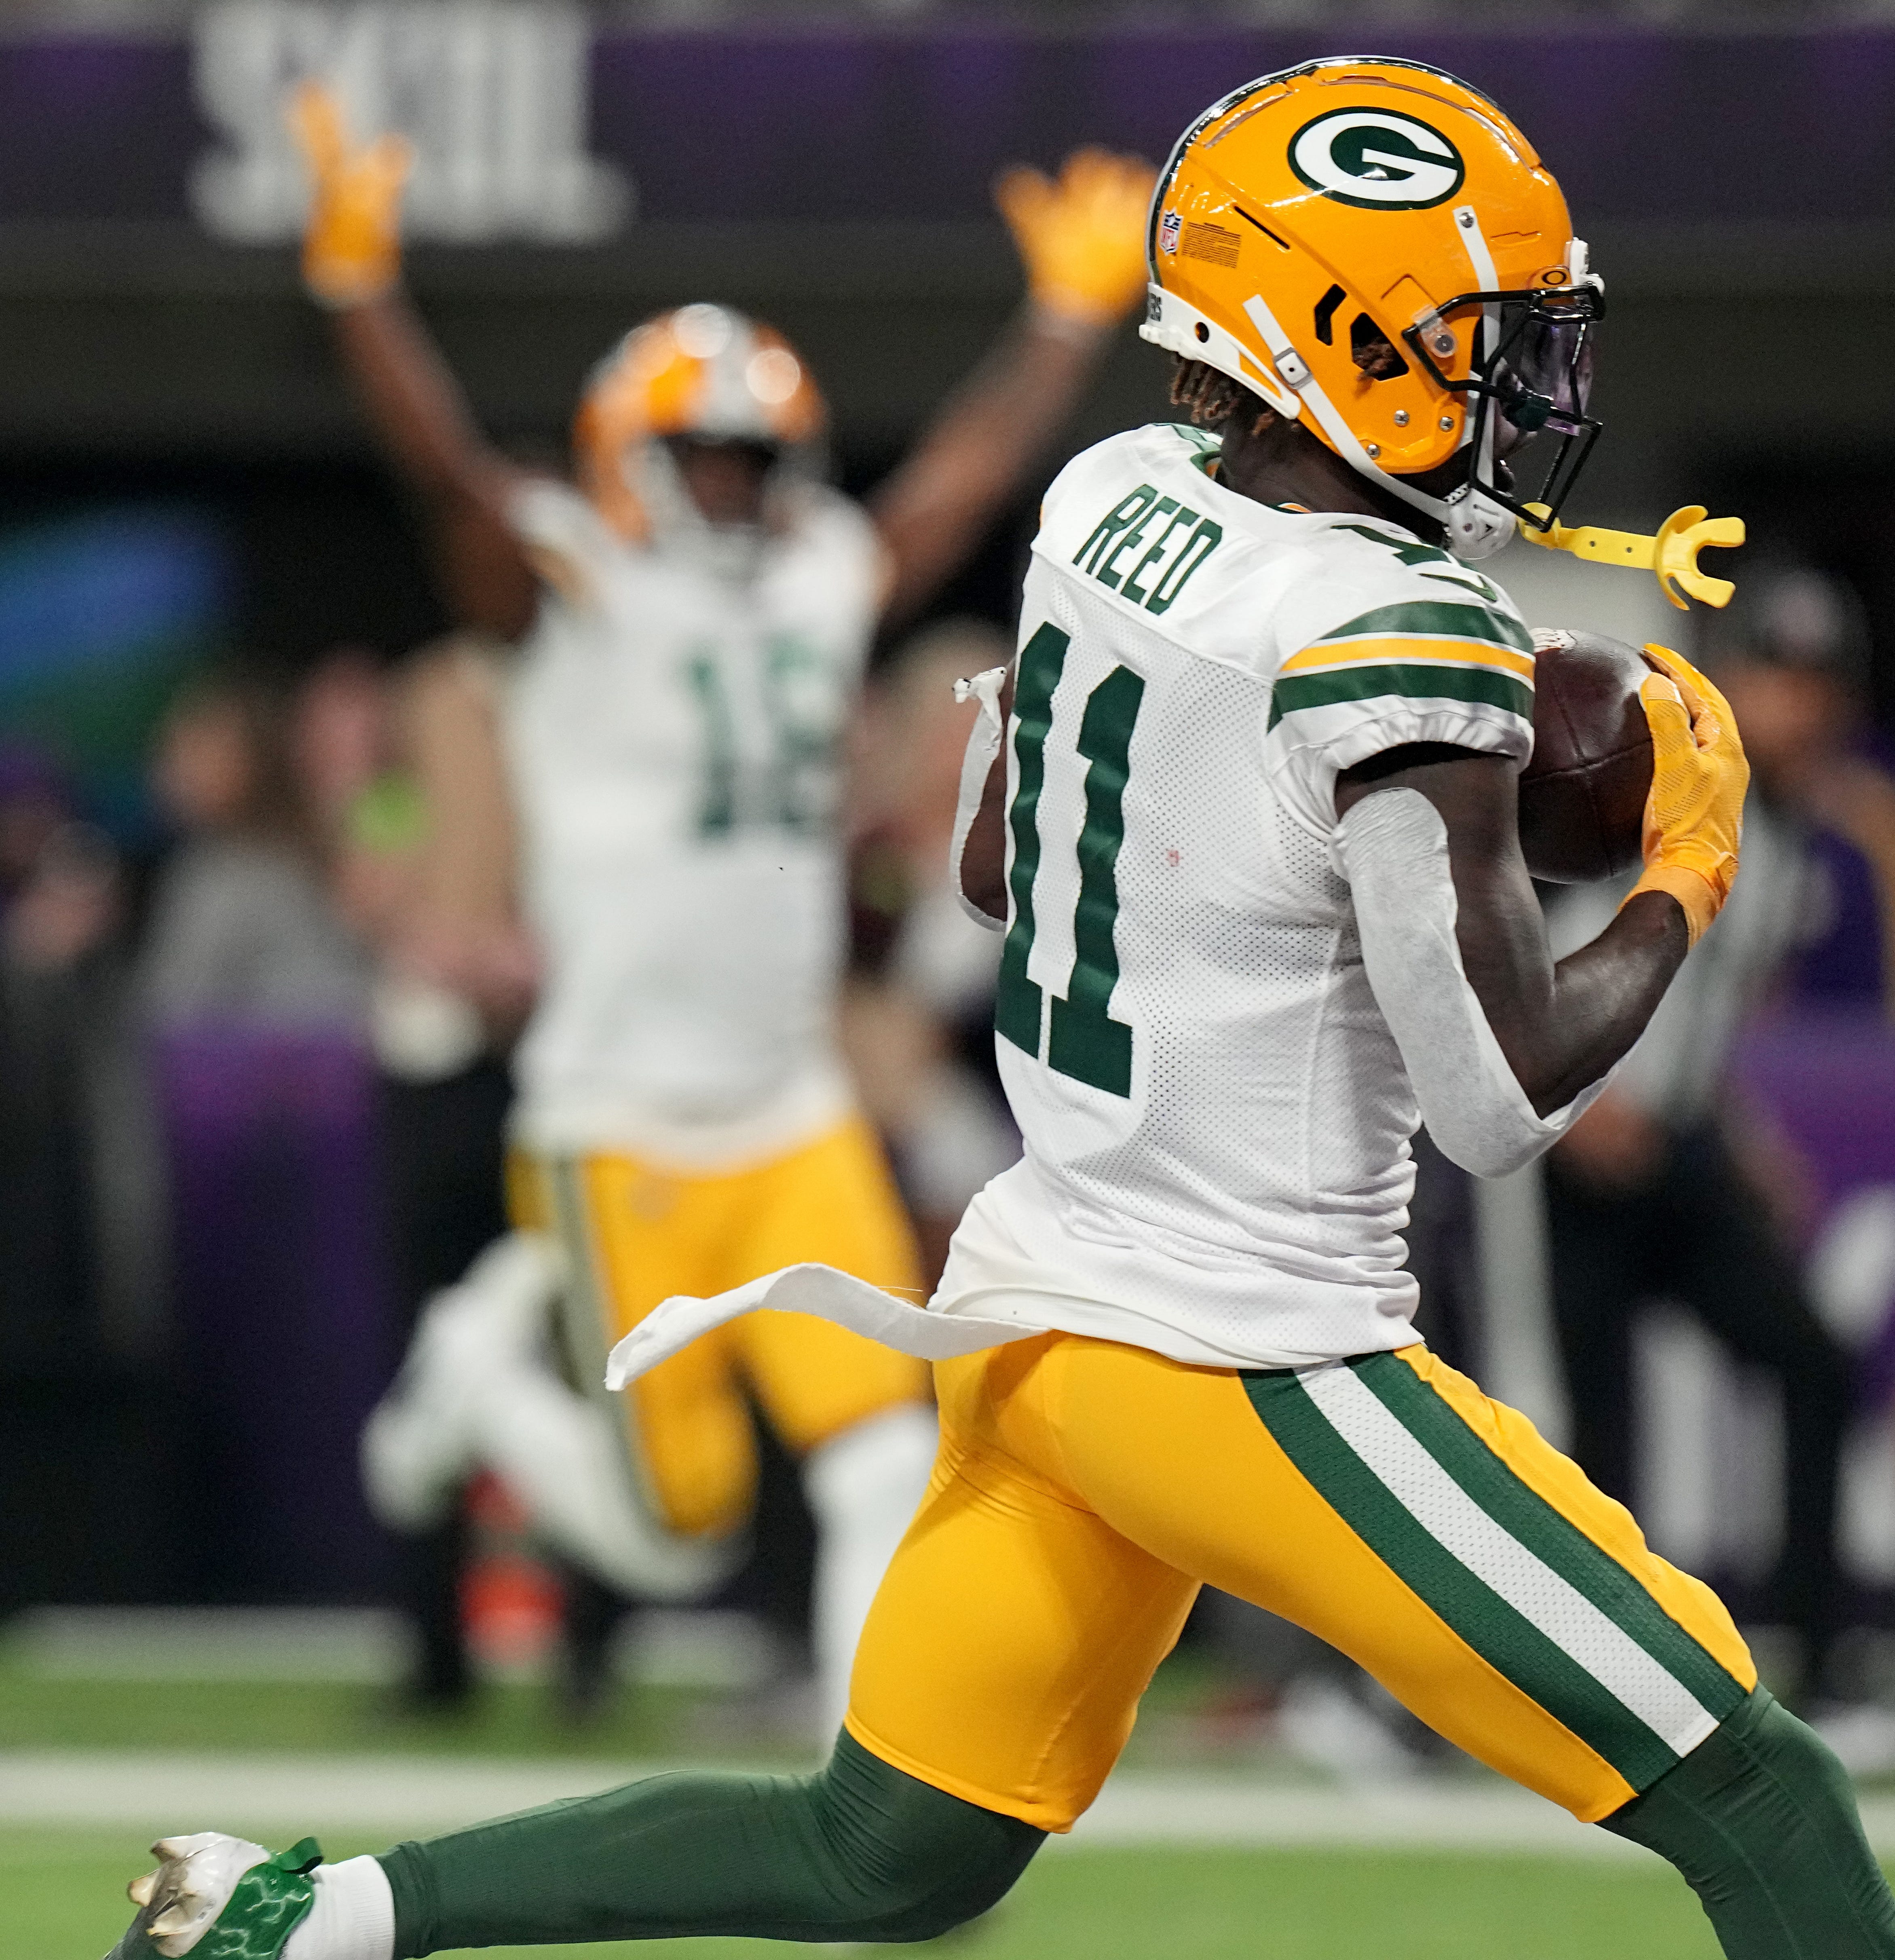 Green Bay Packers wide receiver Jayden Reed (11) catches a touchdown pass during the first quarter of their game Sunday, December 31, 2023 at U.S. Bank Stadium in Minneapolis, Minnesota. The Green Bay Packers beat the Minnesota Vikings 33-10.